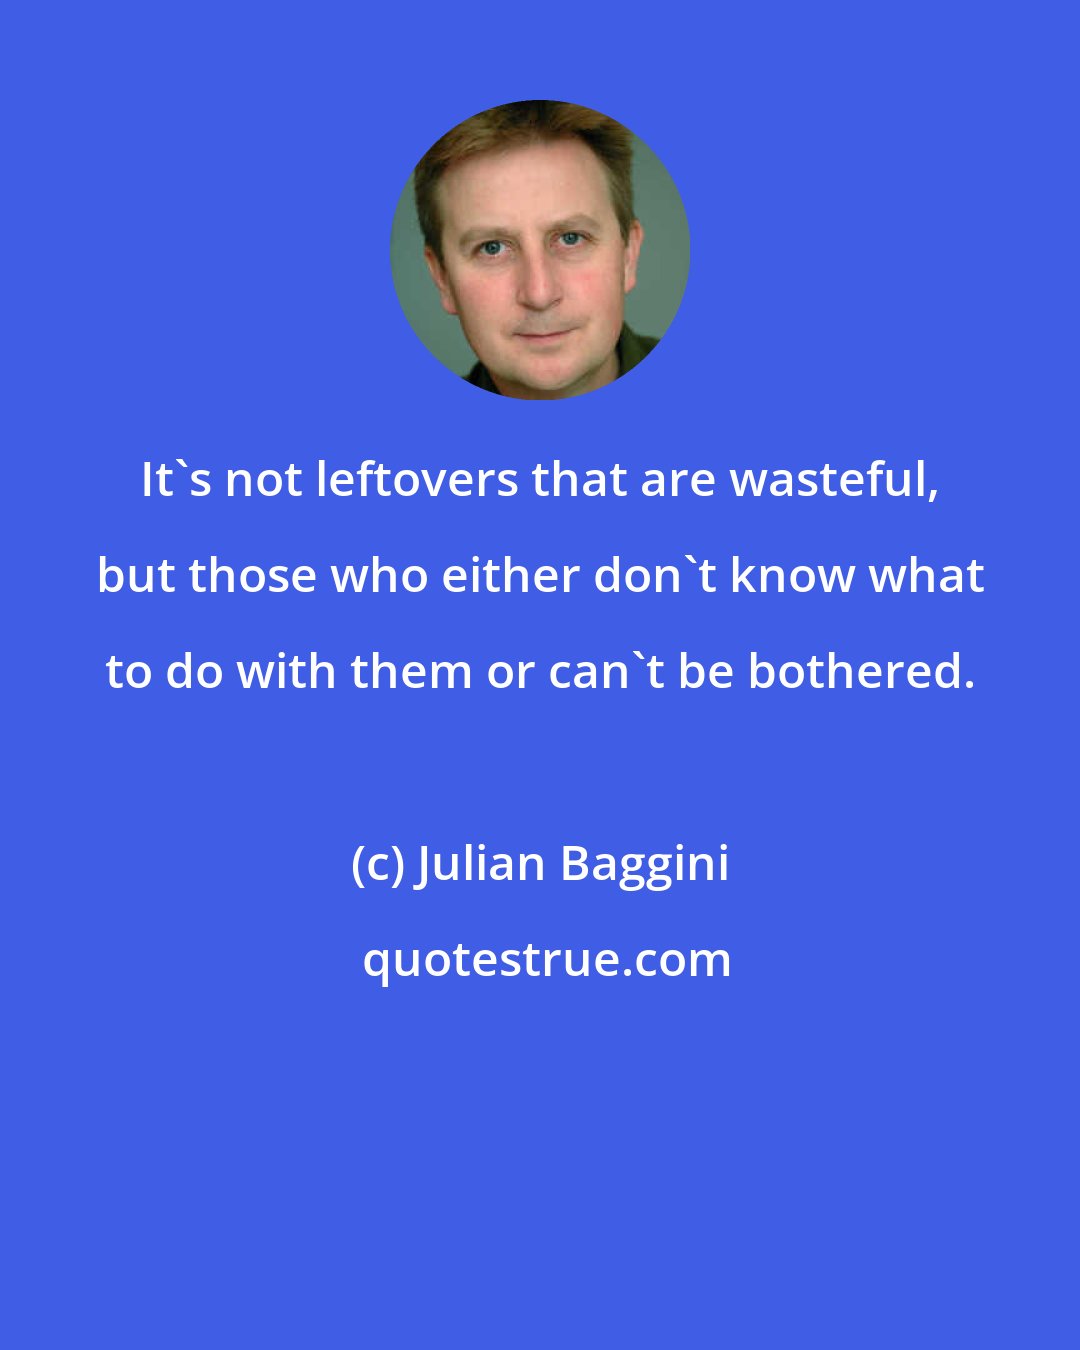 Julian Baggini: It's not leftovers that are wasteful, but those who either don't know what to do with them or can't be bothered.